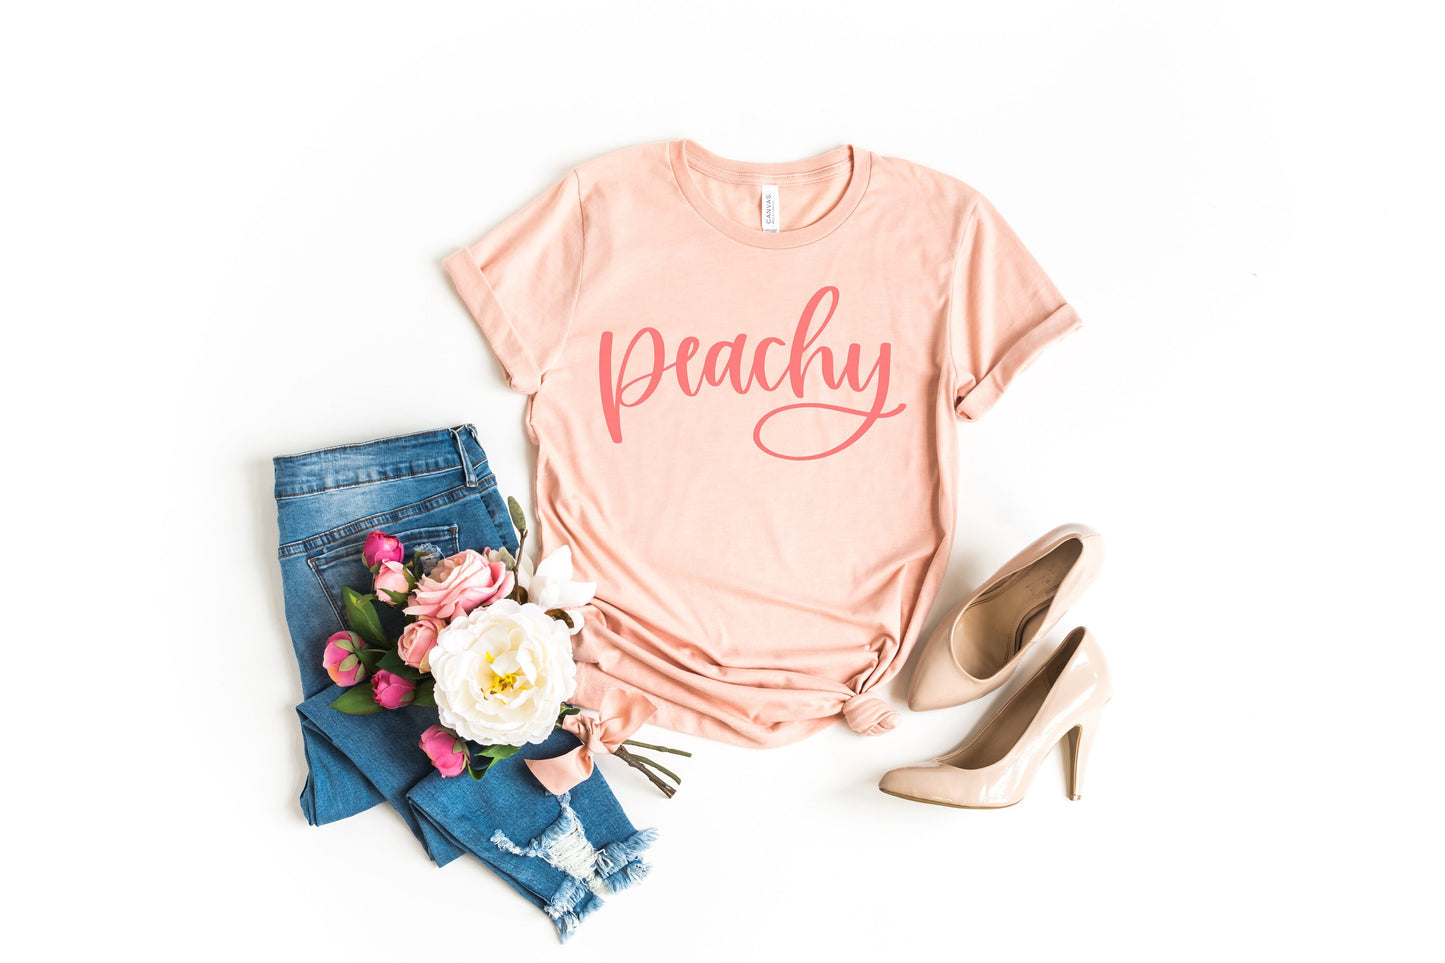 Peachy matching mommy and me t-shirts - just peachy - peachy t-shirt - just peachy shirt - peachy t shirt - mother and daughter - mom and me